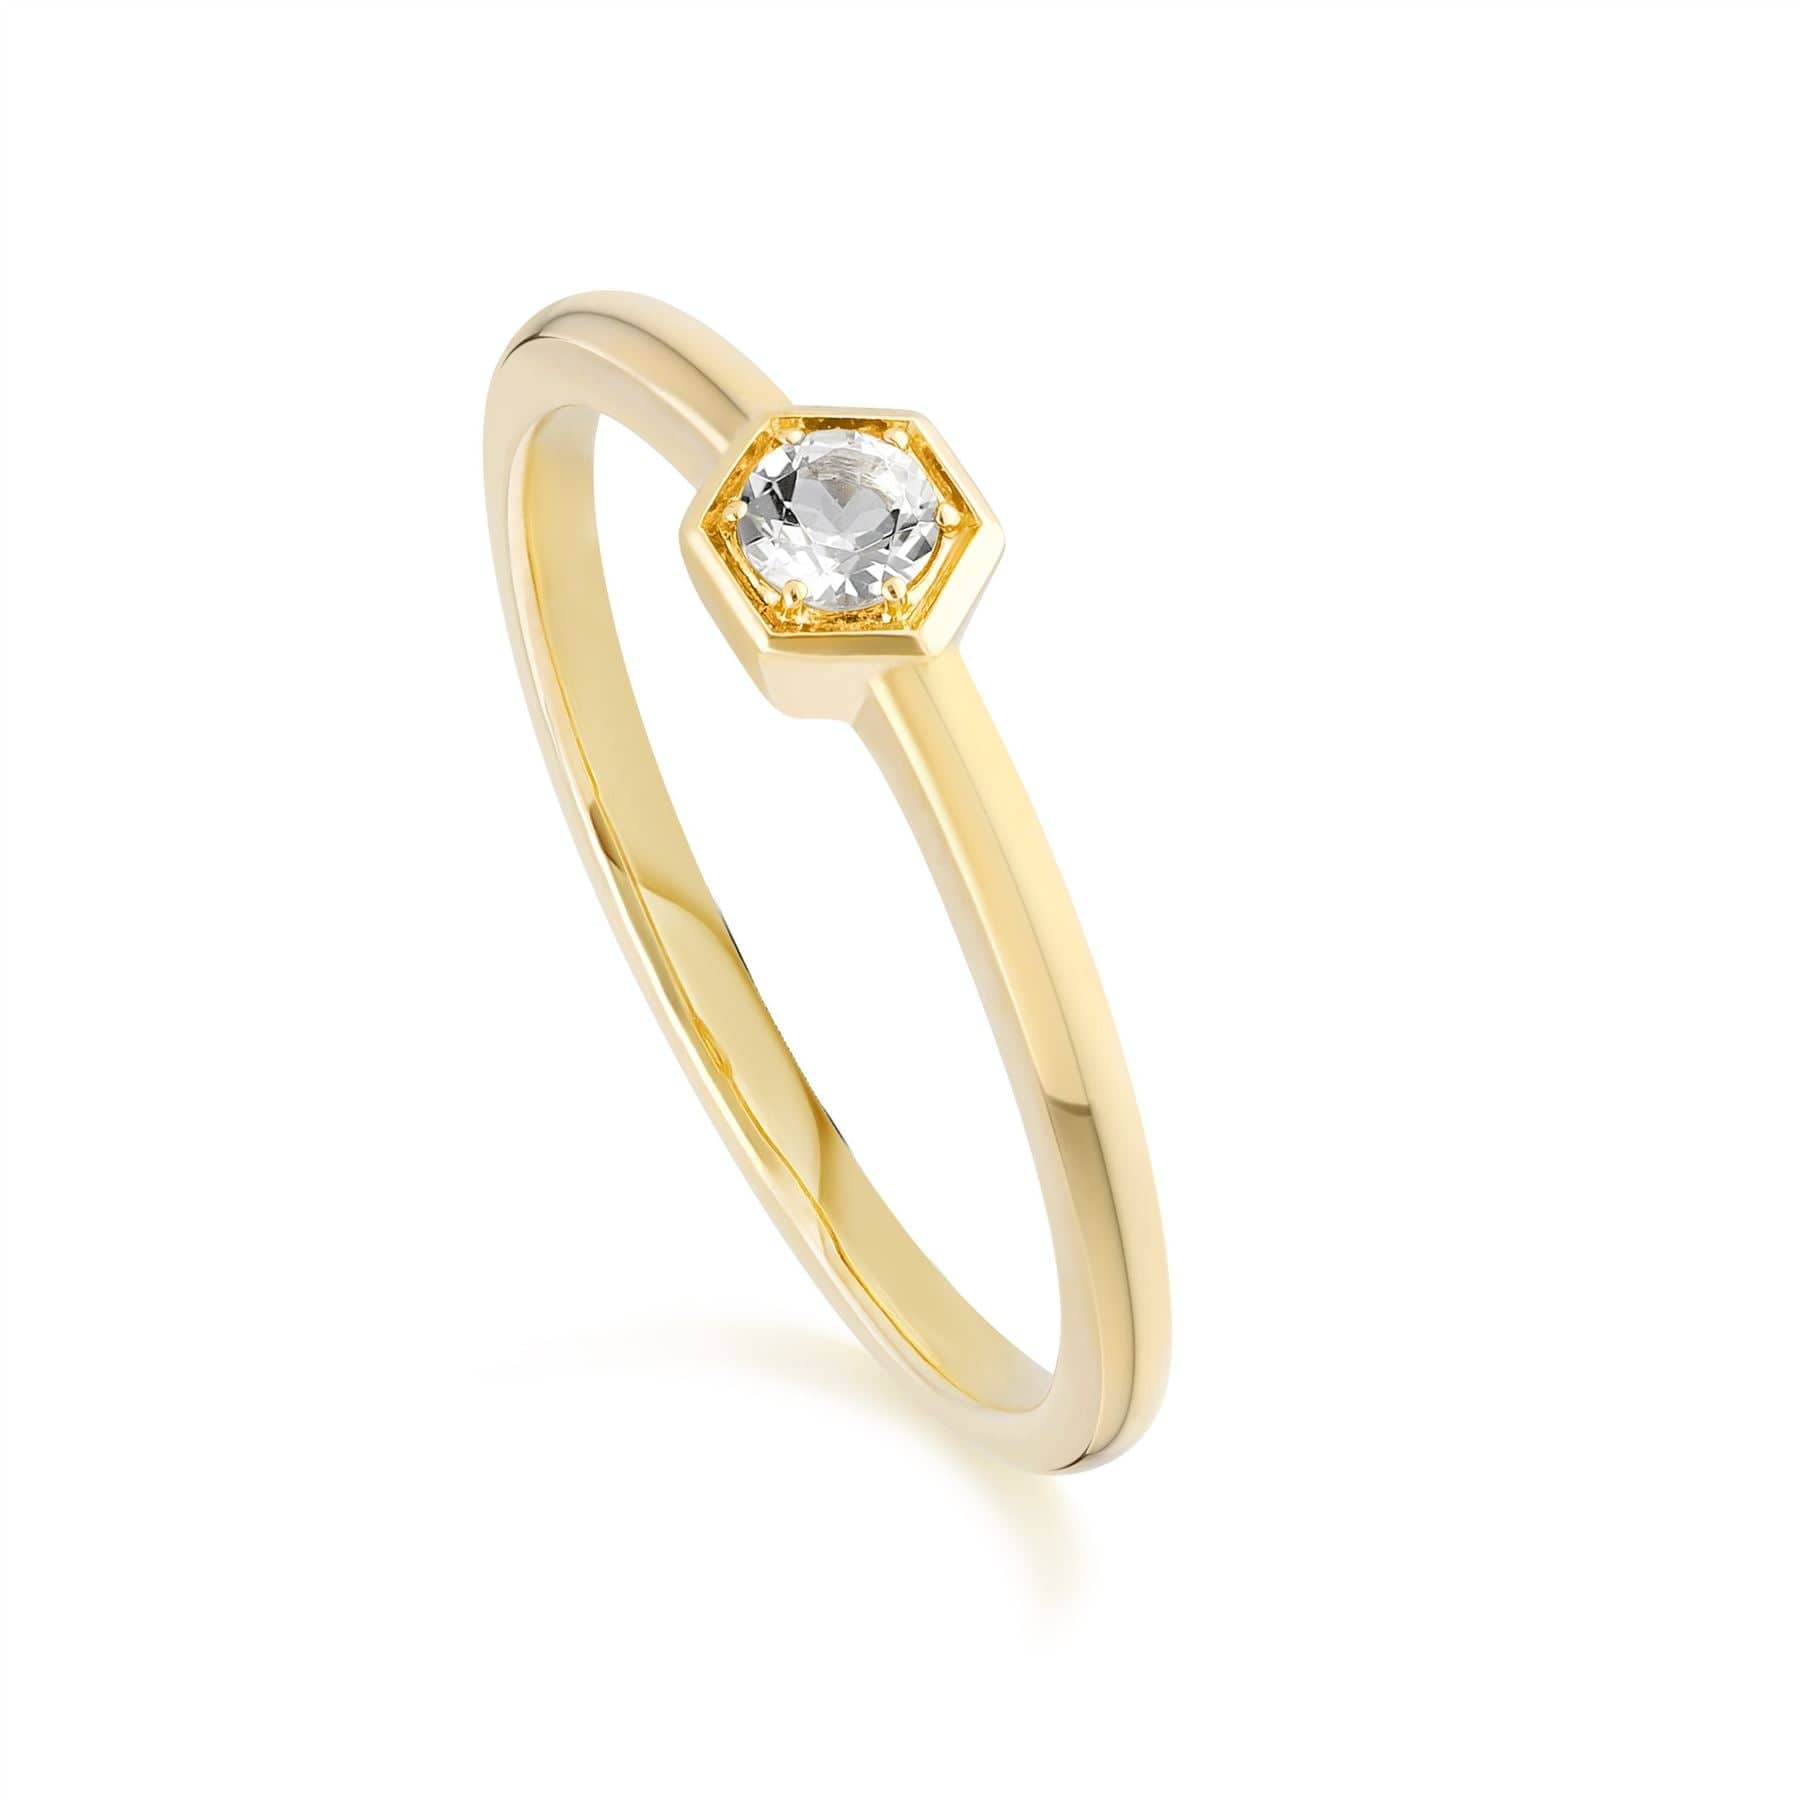 135R1837059 Honeycomb Inspired White Topaz Solitaire Ring in 9ct Yellow Gold 1